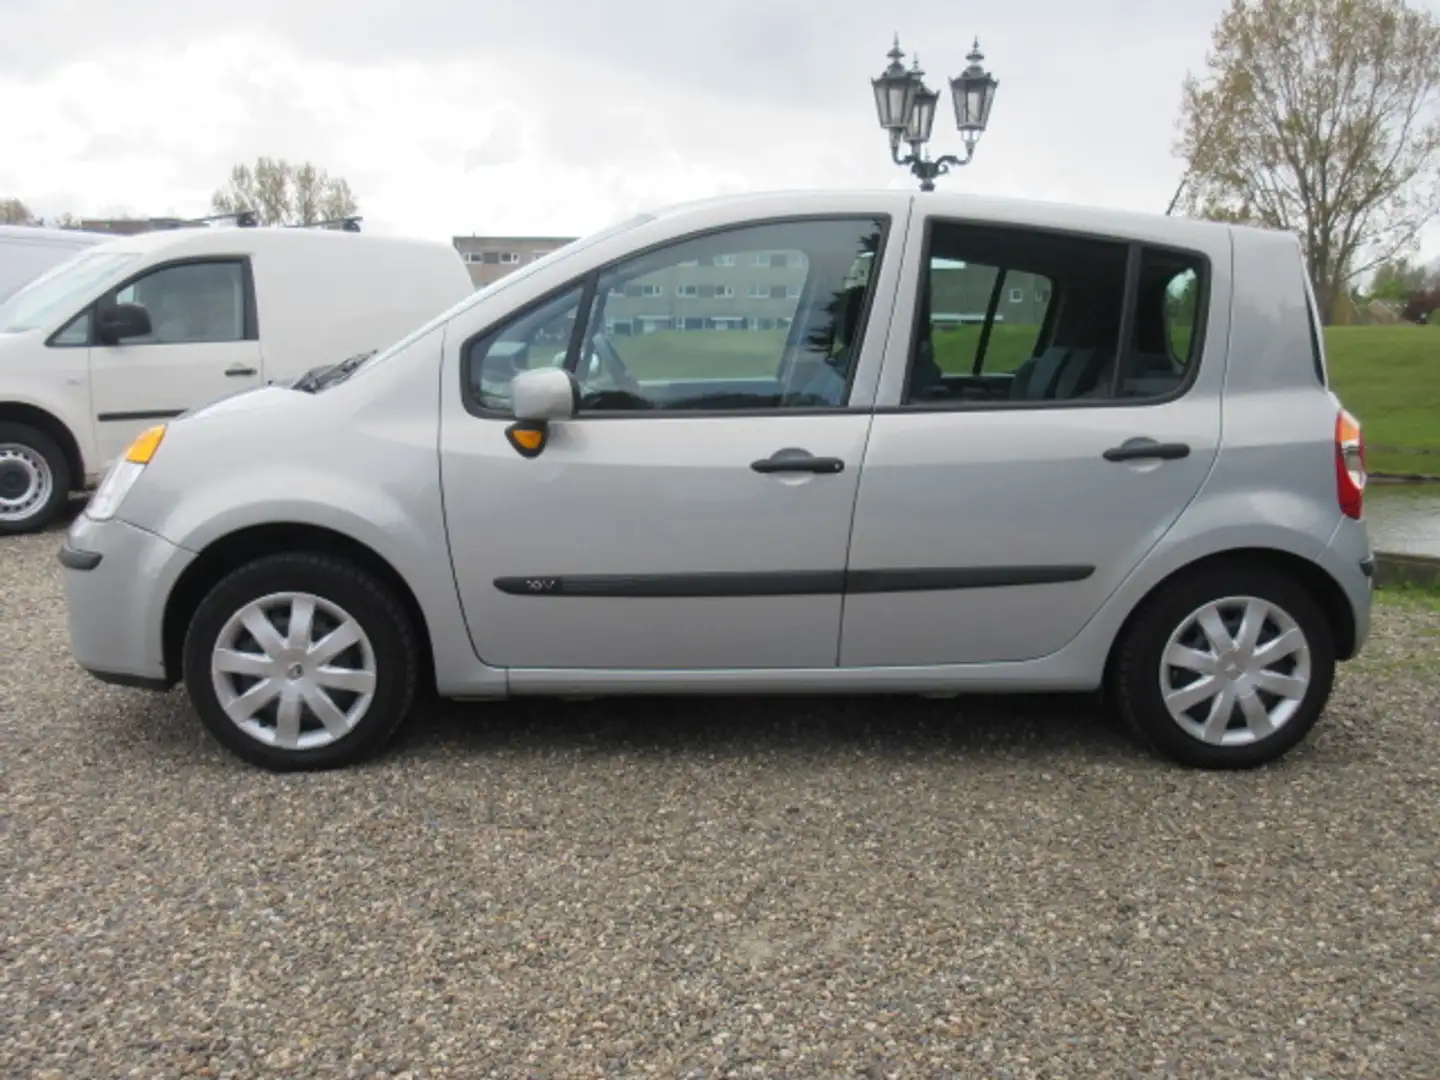 Renault Modus 1.2-16V Authentique Luxe - 100.000 Km NAP donderda siva - 2